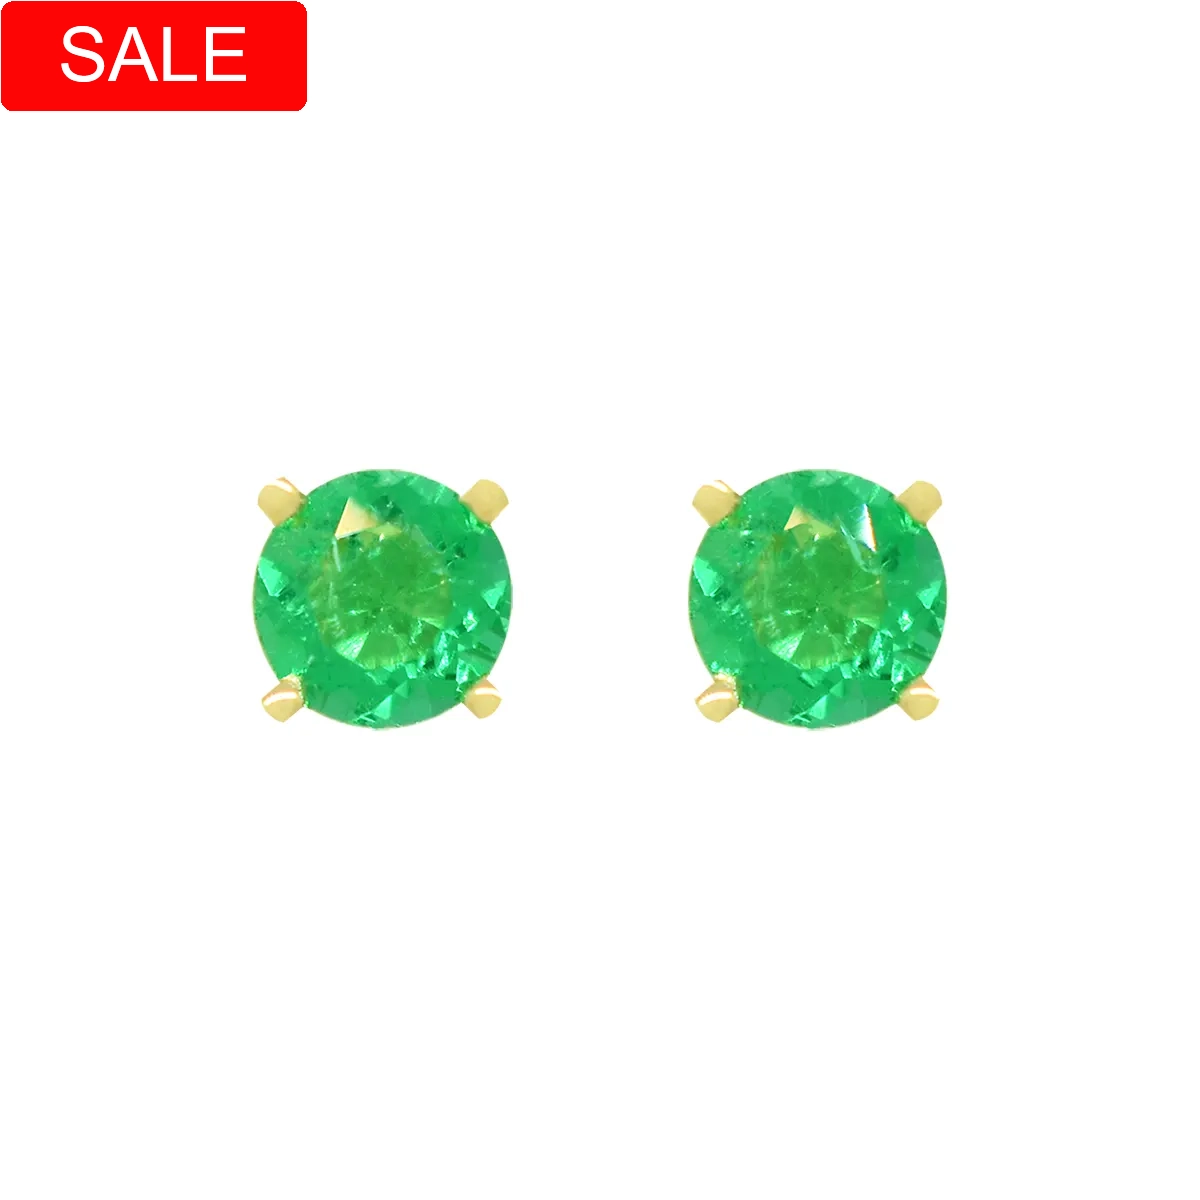 Stud emerald earrings in 18K yellow gold classic 4 prong setting with 2 real Colombian emeralds